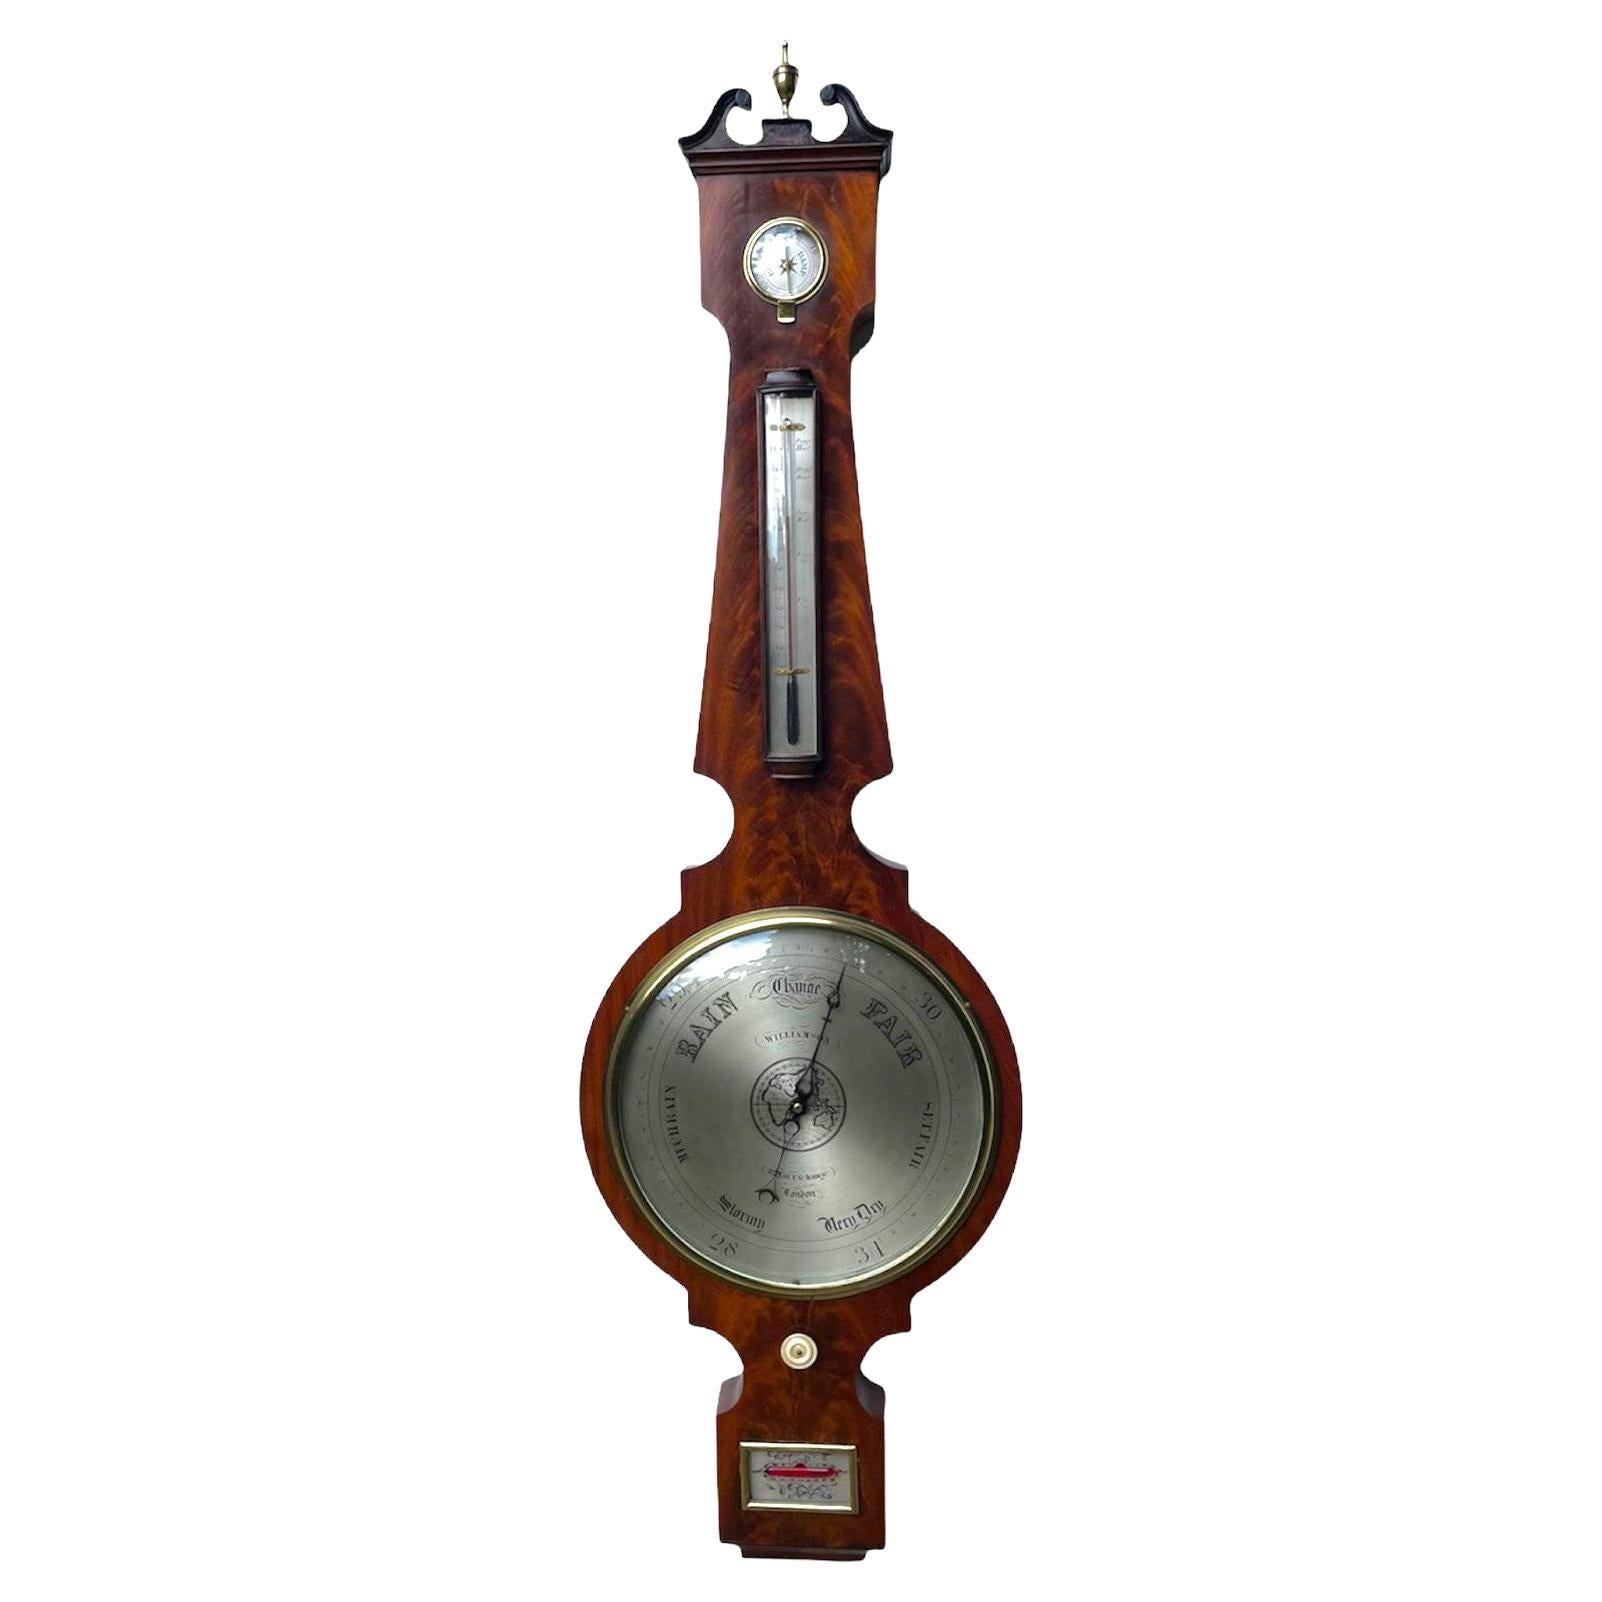  Outstanding Quality Antique 18th Century George III Oversized Banjo Barometer